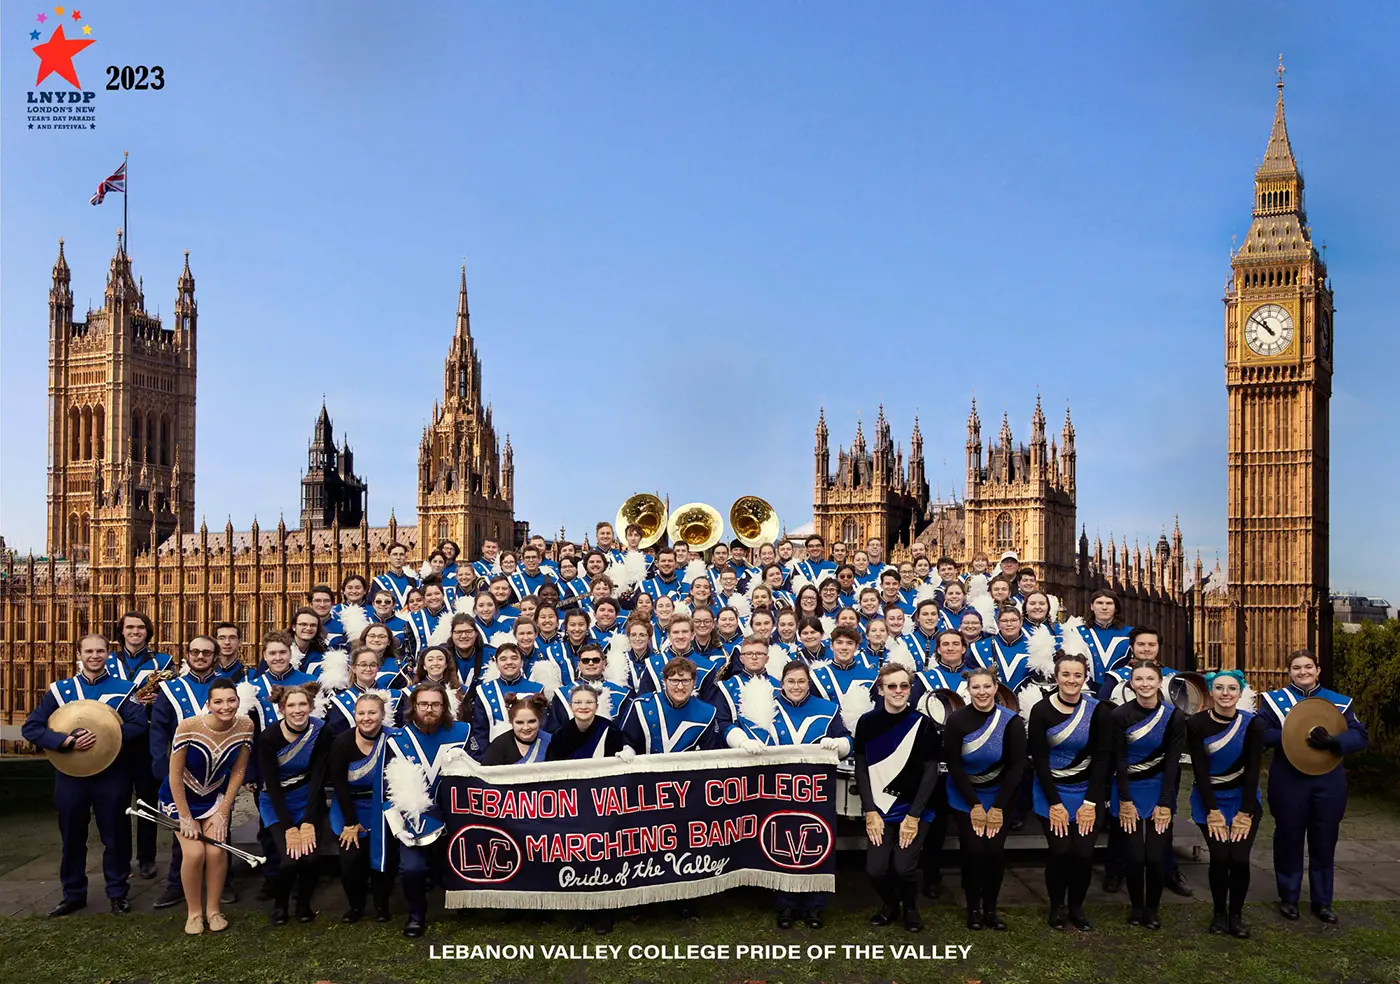 Lebanon Valley College Pride of The Valley marching band in London